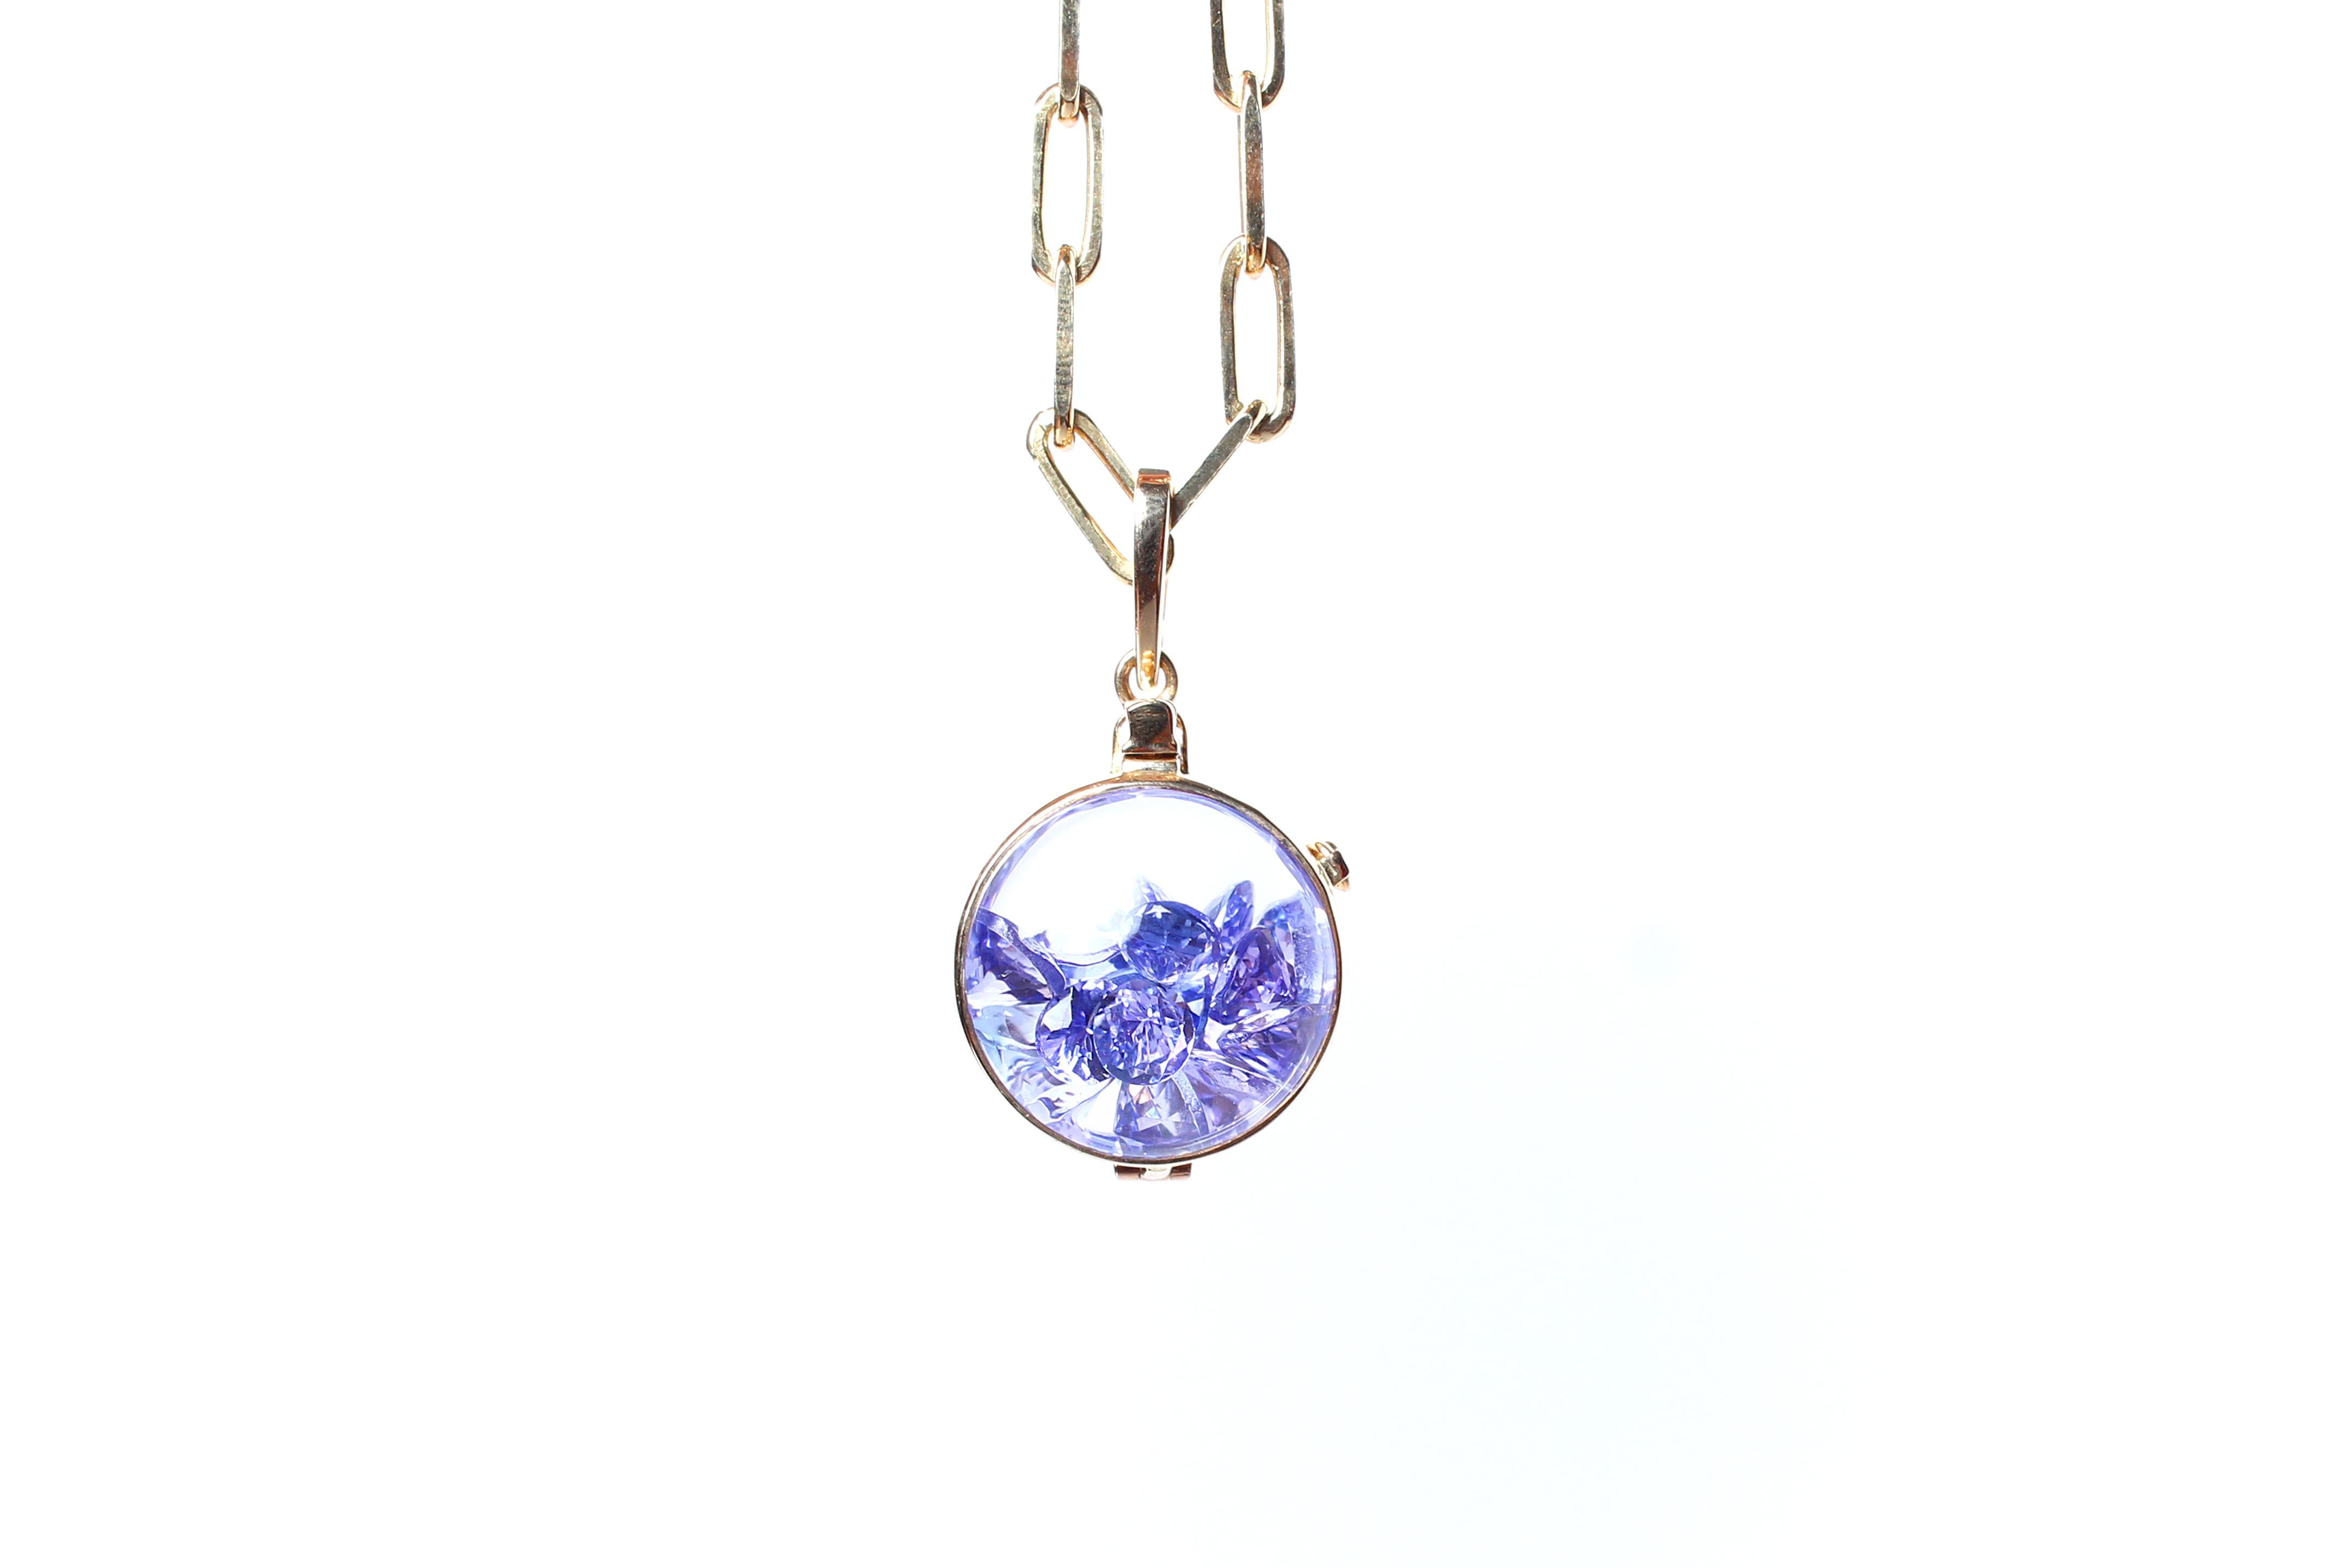 Clarissa Bronfman Tanzanite Shaker Pendant 14k Gold PaperclipLink Chain Necklace In New Condition For Sale In New York, NY